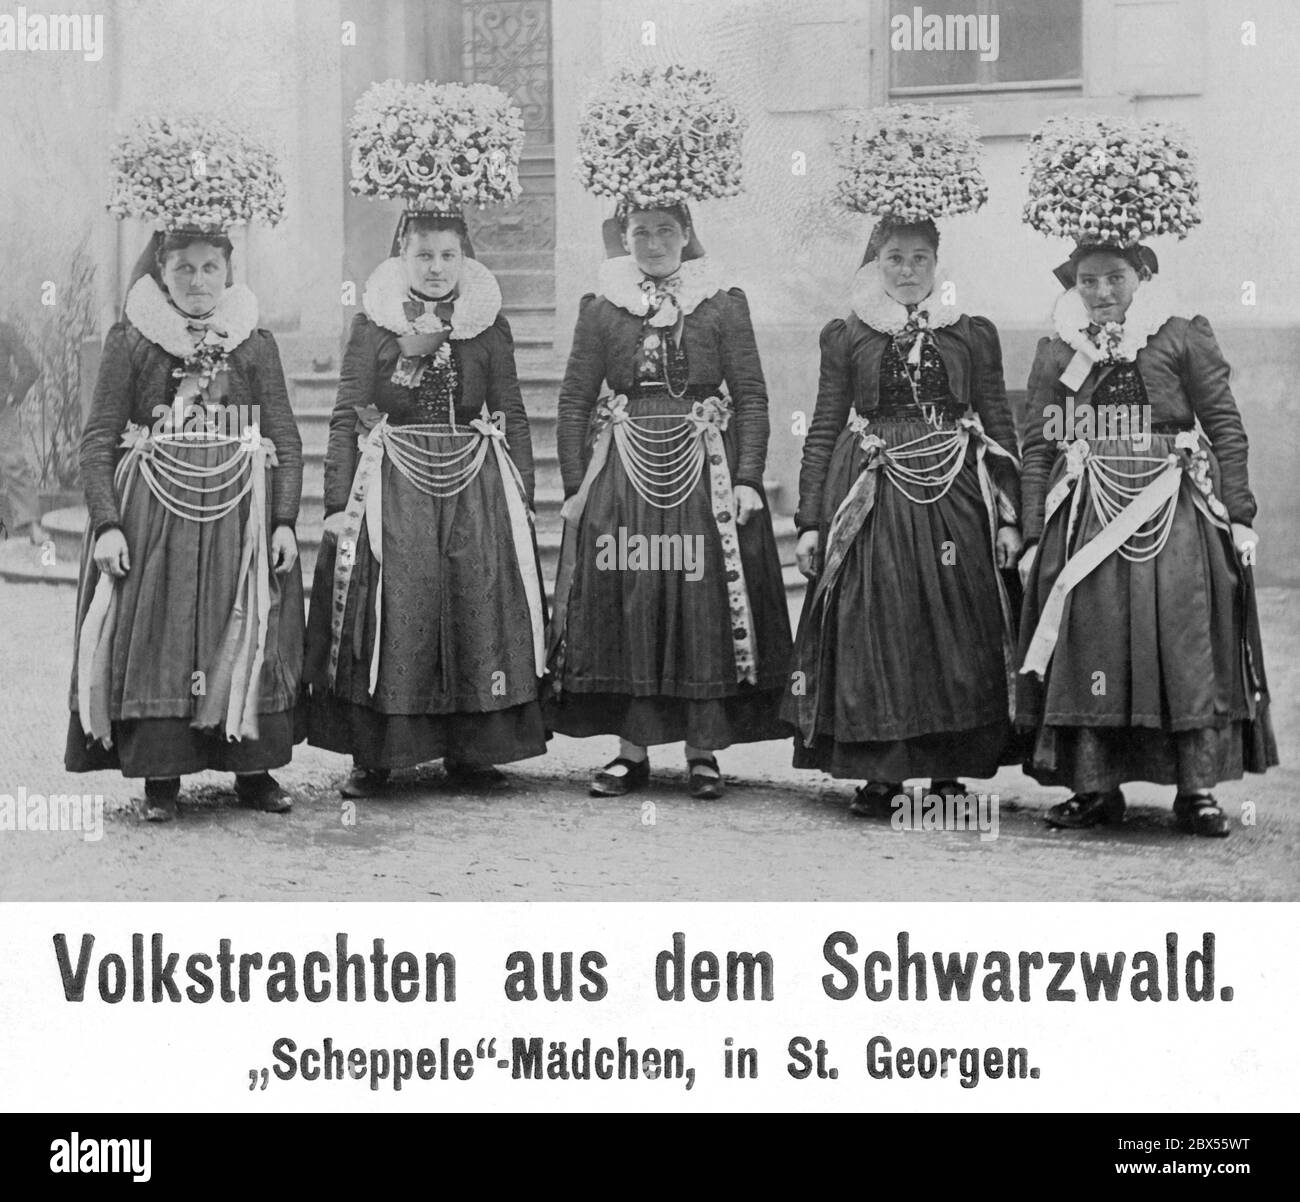 Young women from Sankt Georgen in the Black Forest wear traditional folk costumes and large bridal crowns (Schaeppel). Stock Photo